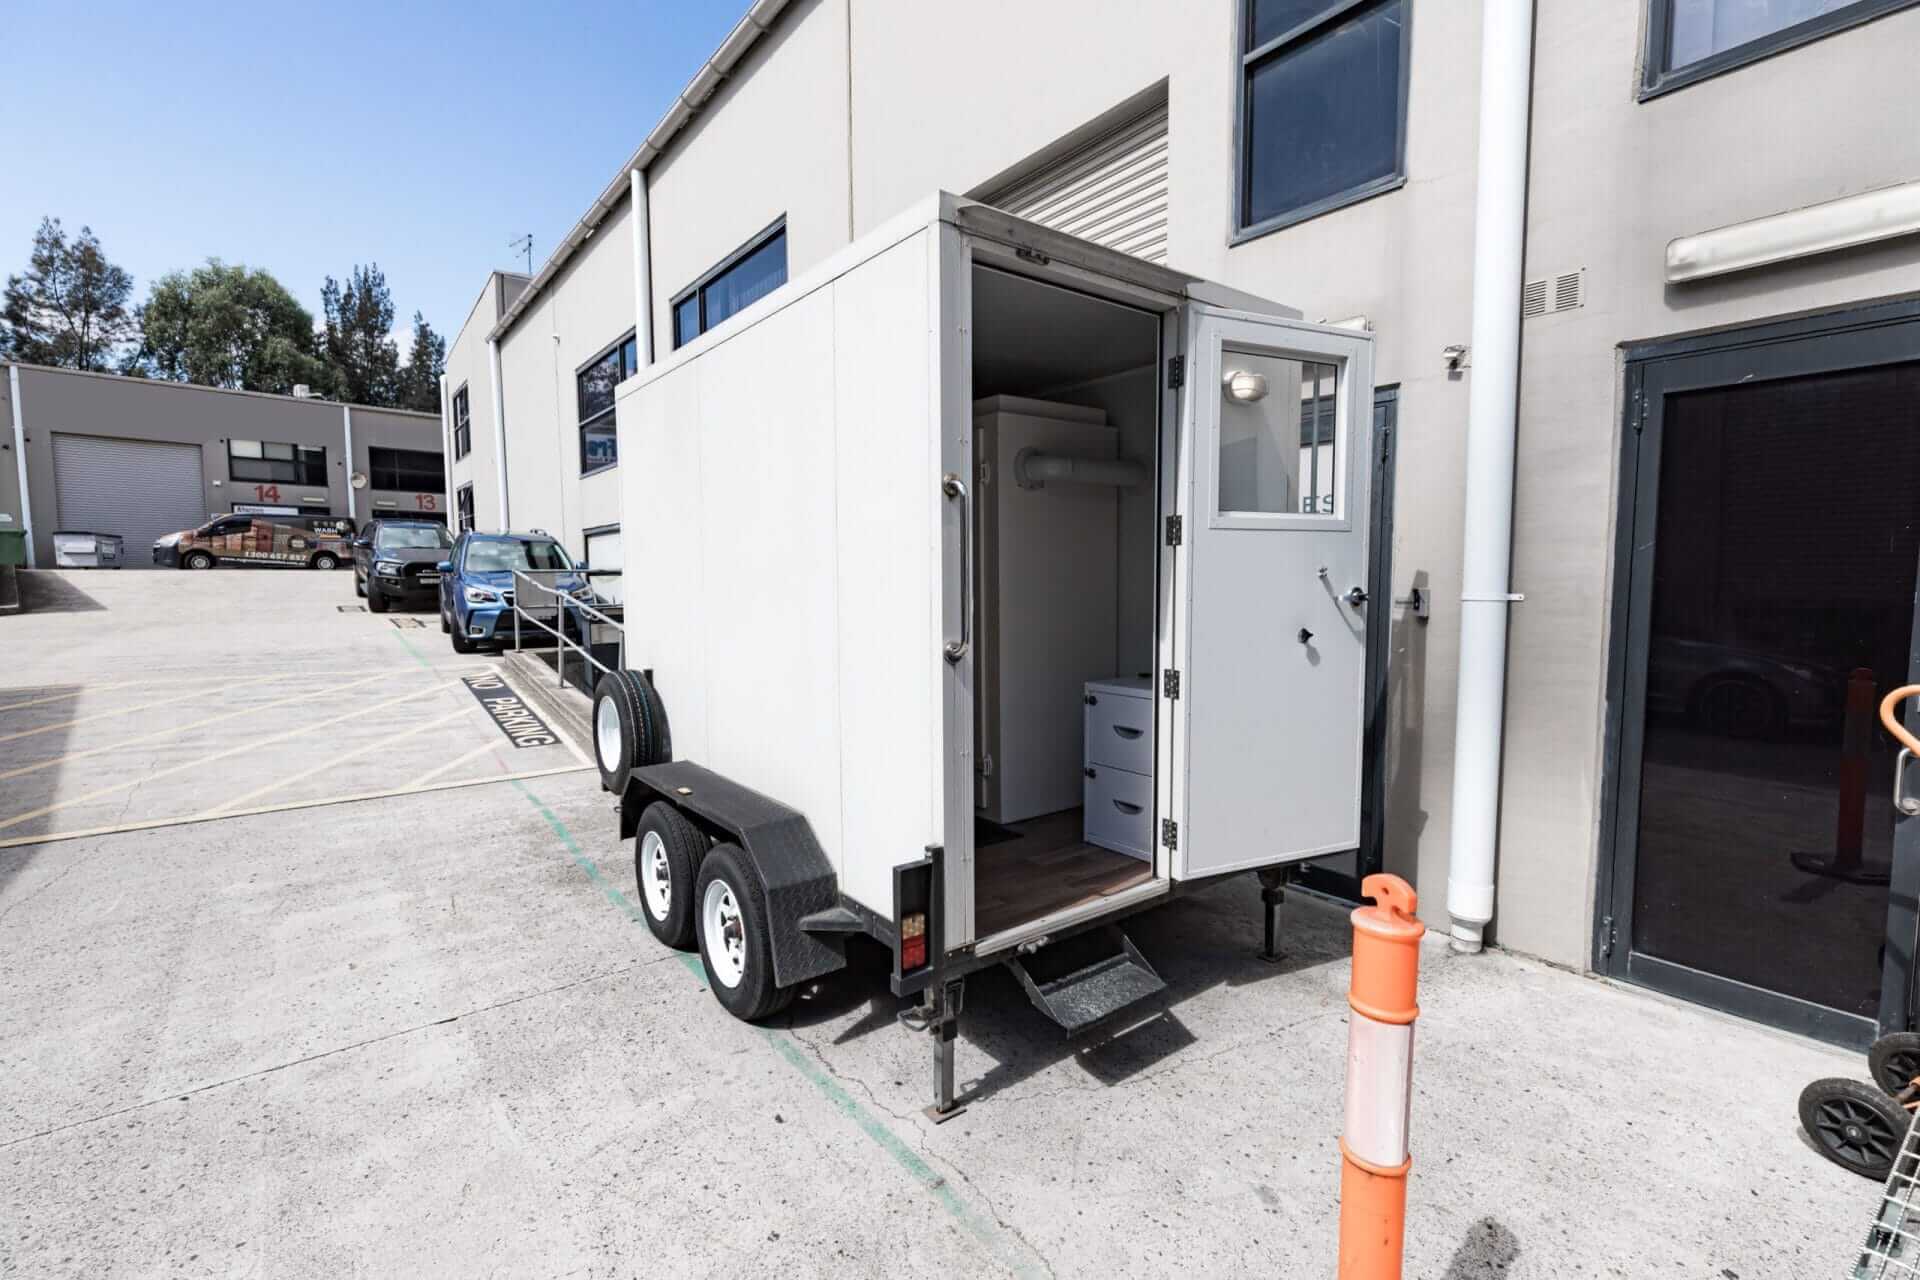 A portable toilet trailer is parked in front of a workplace building.